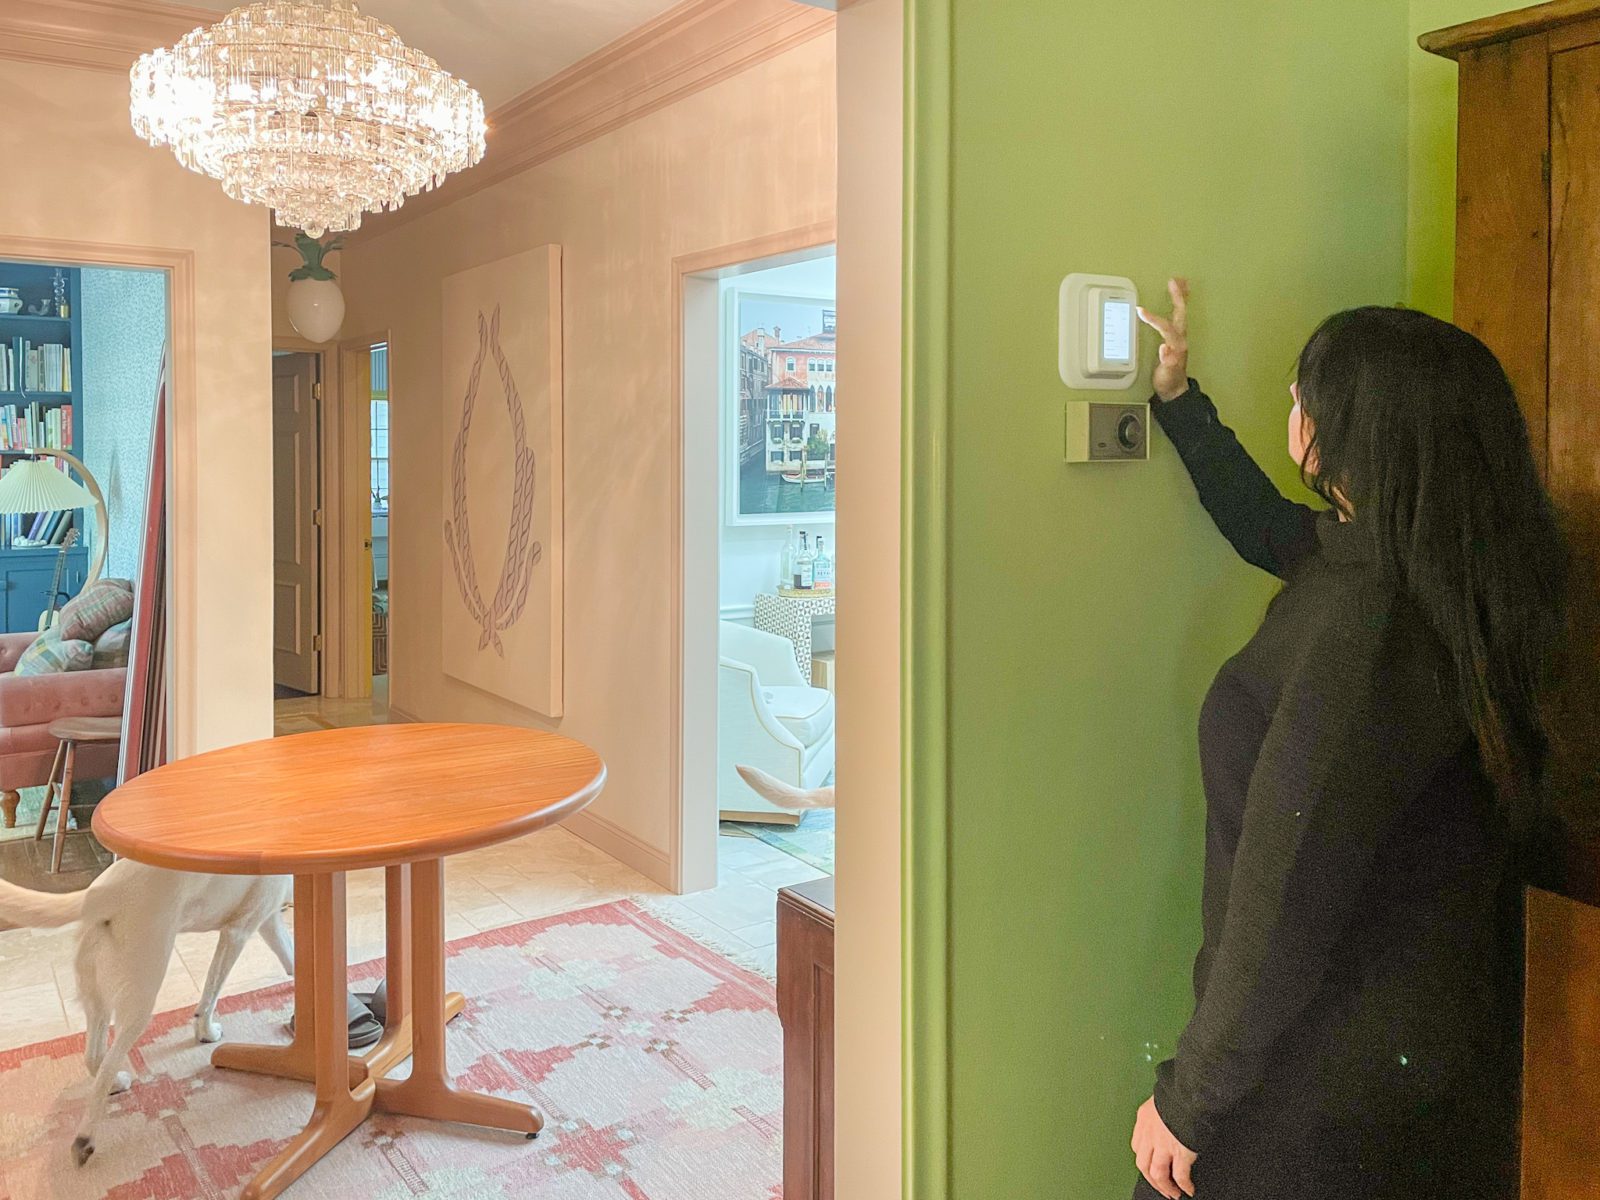 Woman adjusting her wall thermostat in the foreground.